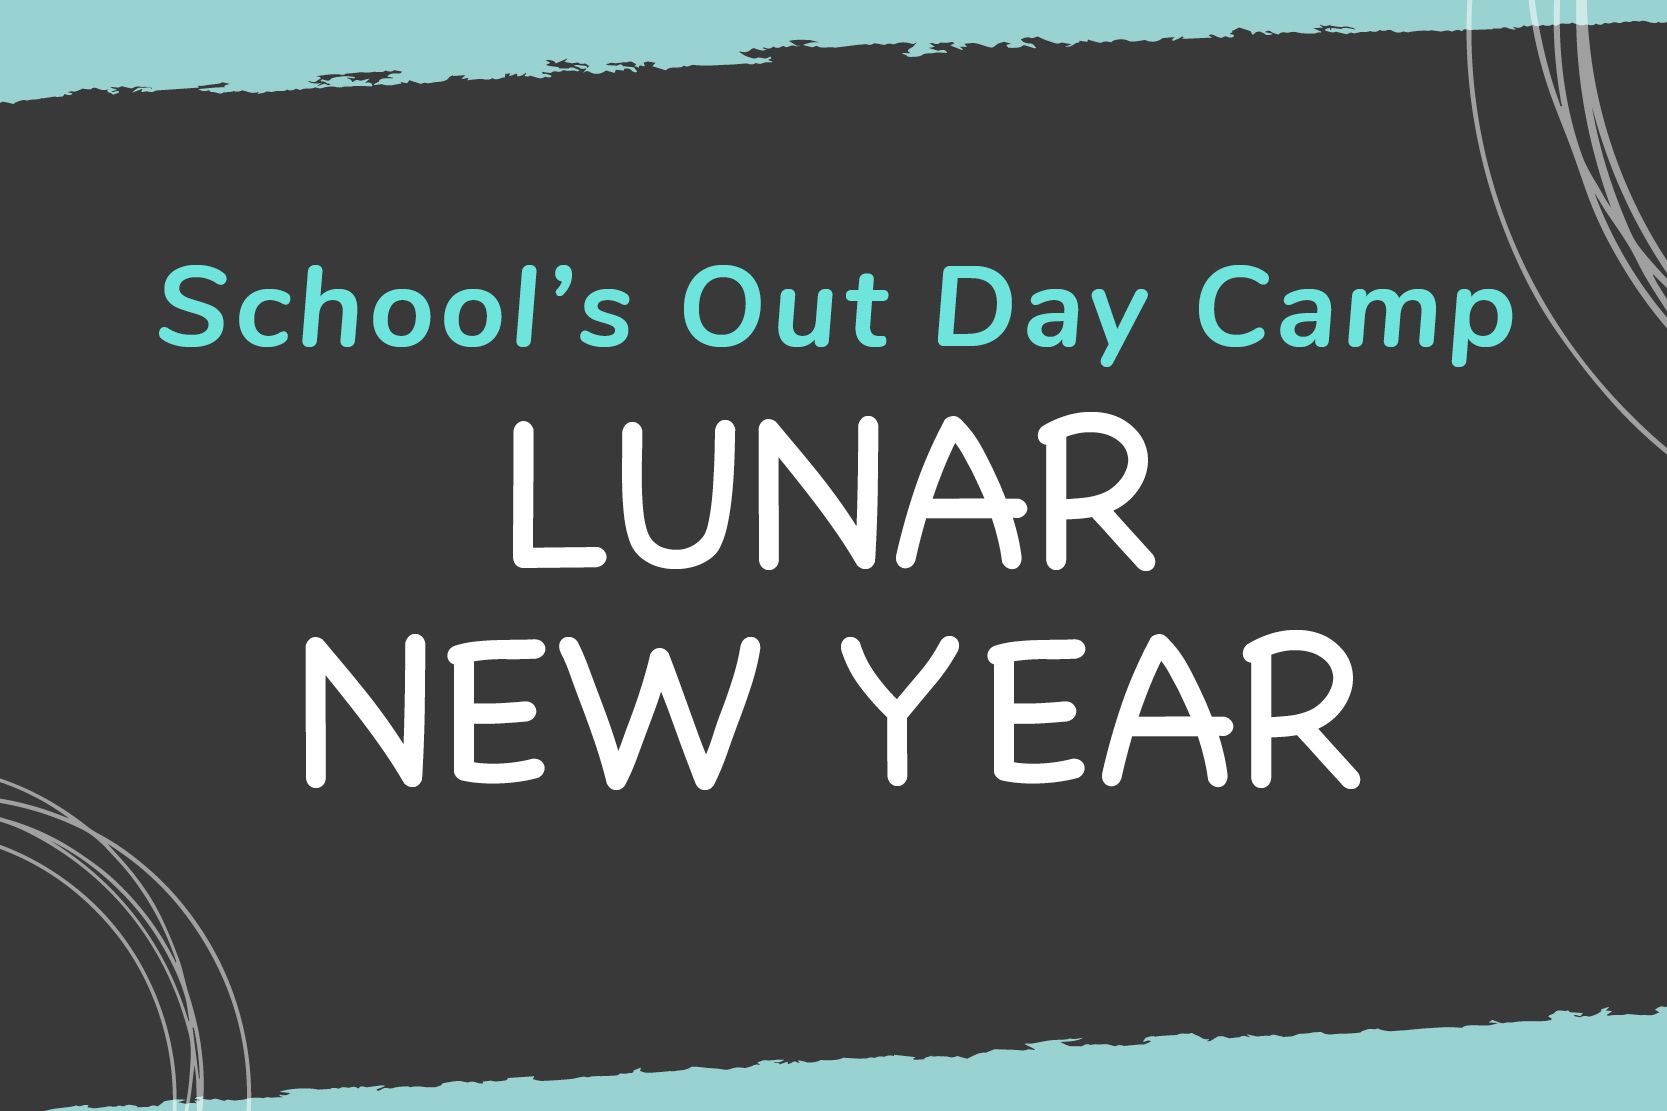 School's Out Camp - Lunar New Year